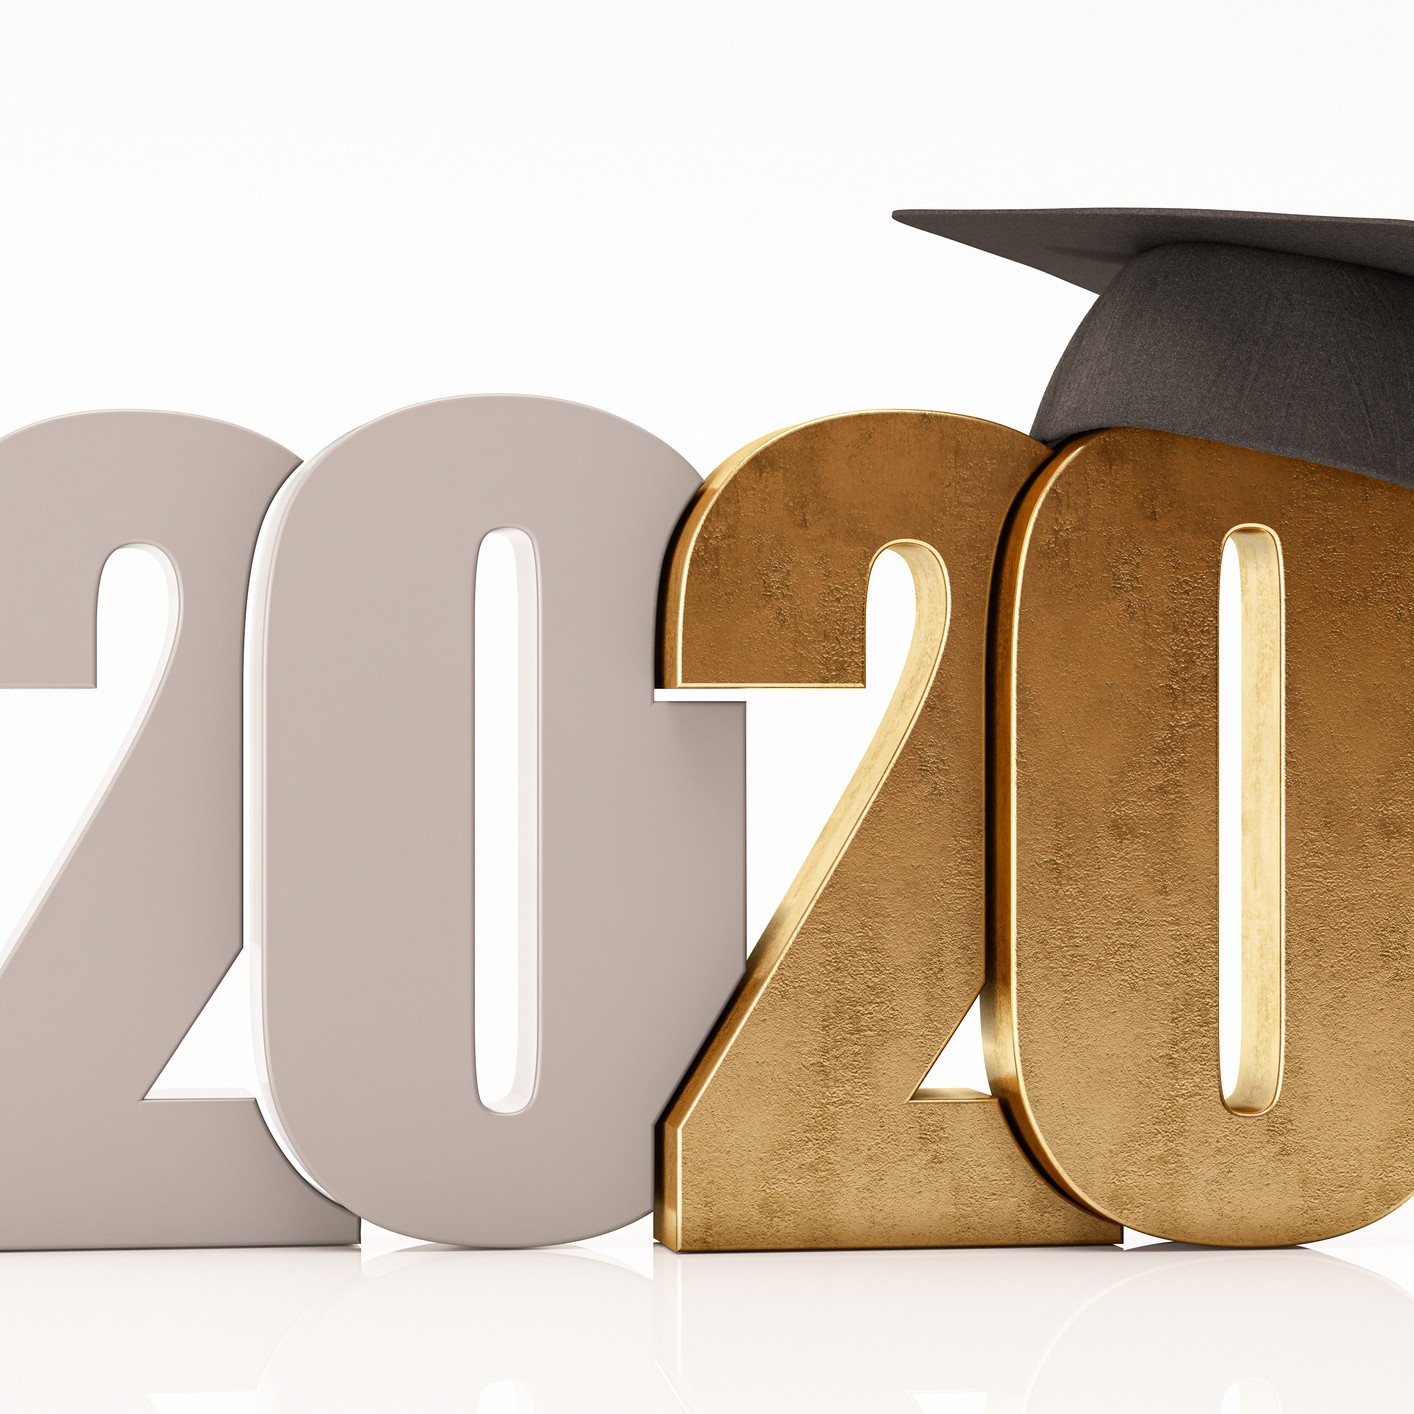 2020 block letters with graduation cap on top